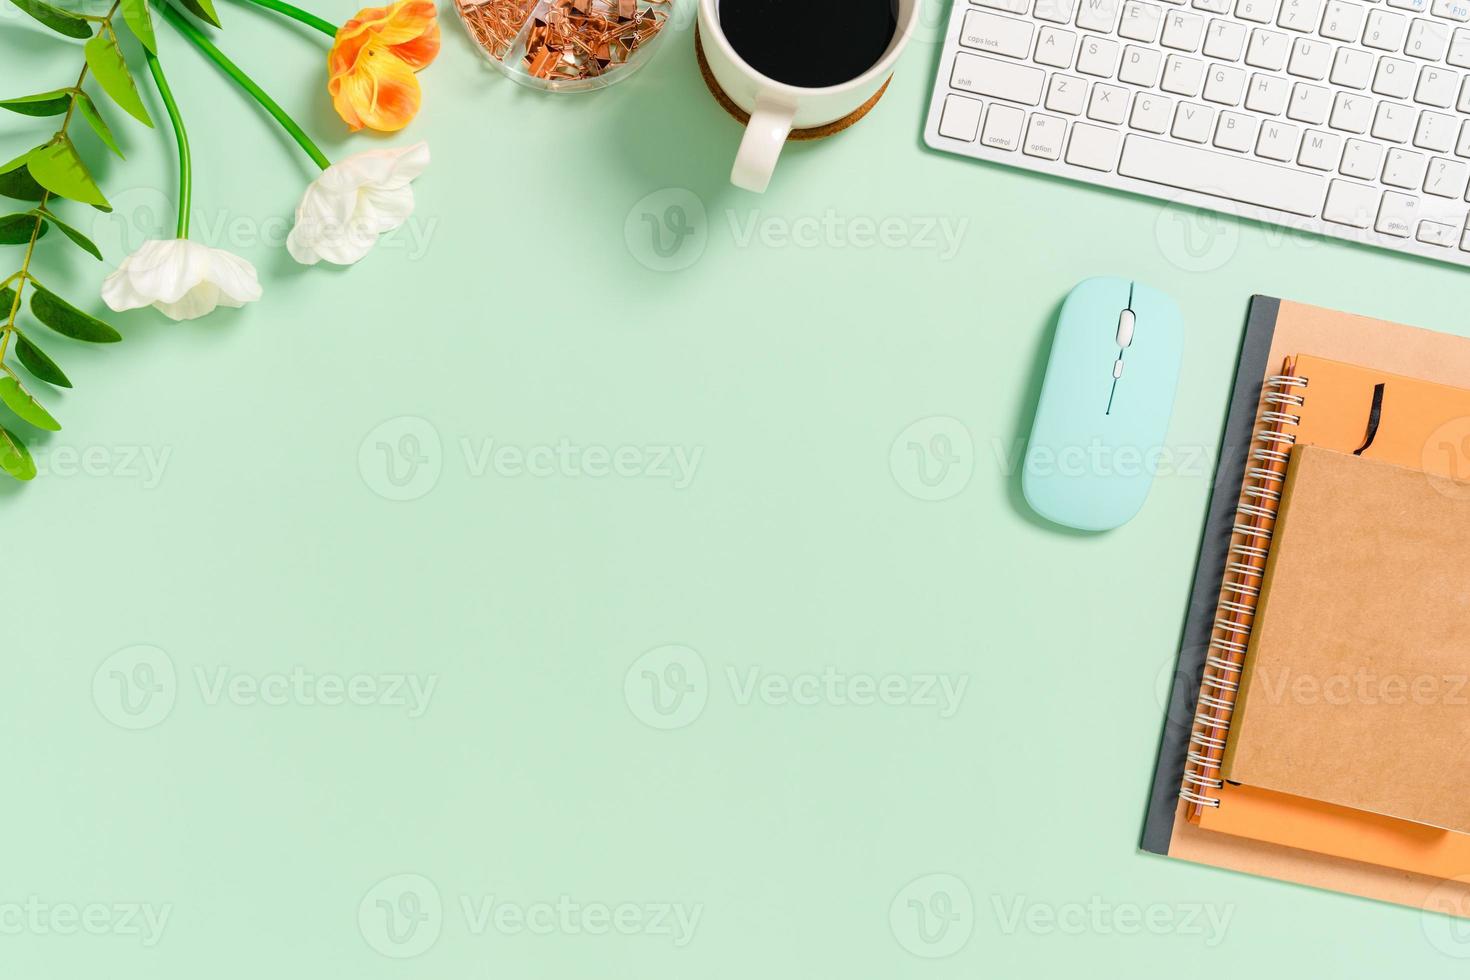 Minimal work space - Creative flat lay photo of workspace desk. Top view office desk with keyboard, mouse and notebook on pastel green color background. Top view with copy space, flat lay photography.